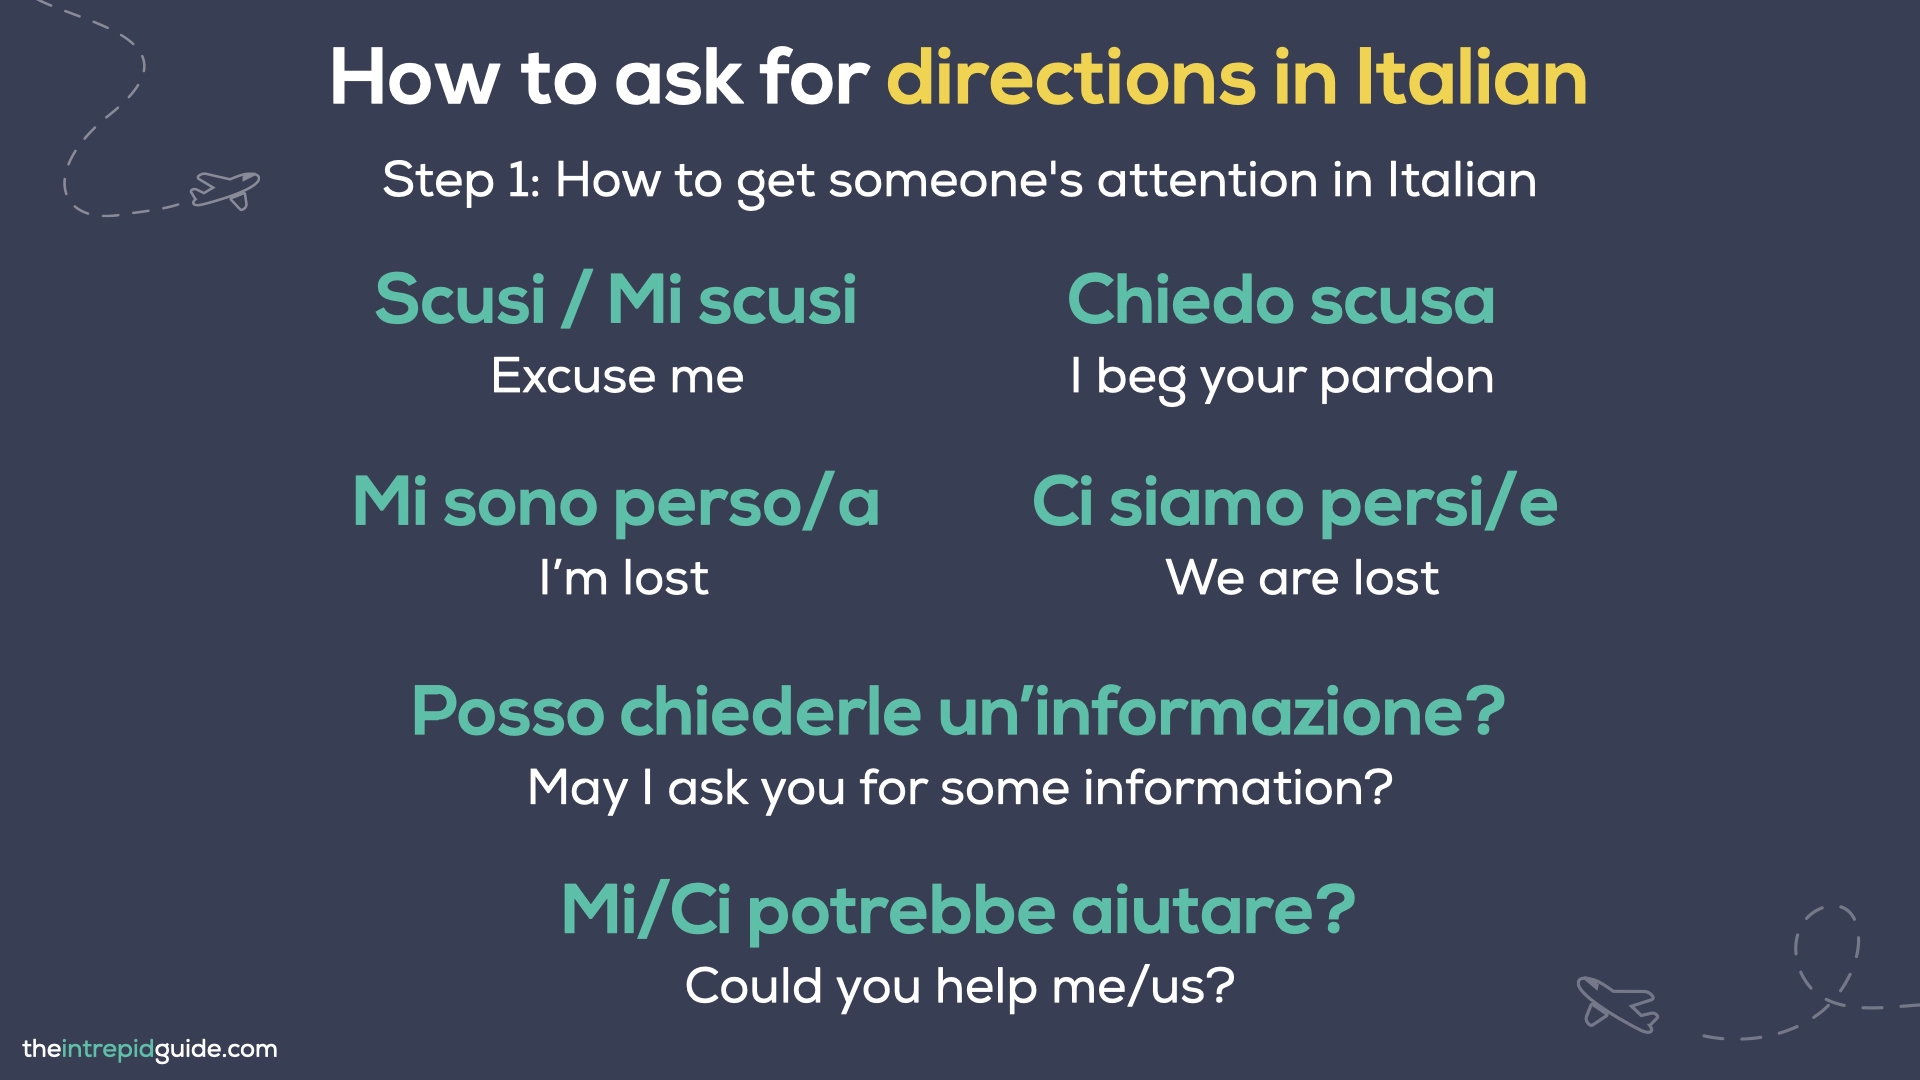 Directions in Italian - How to ask for directions in Italian